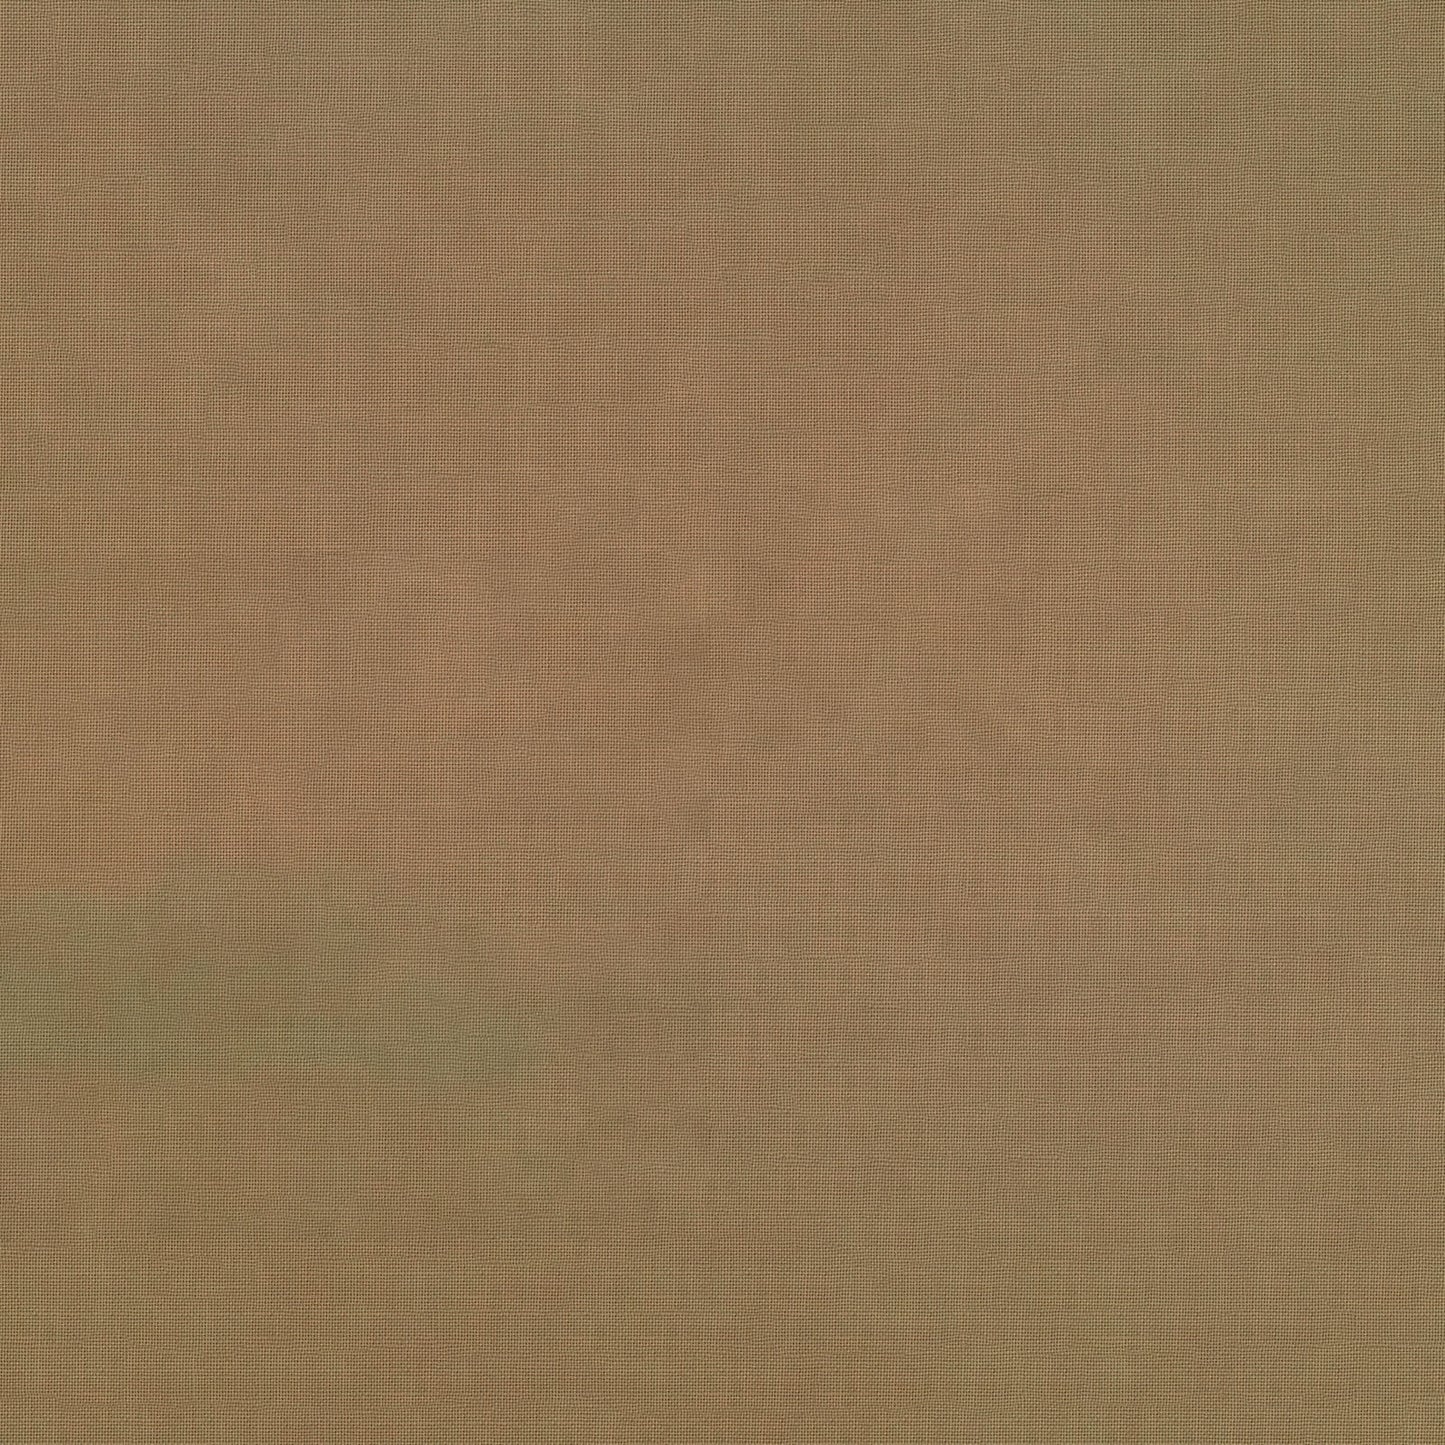 Silky Cotton Solids Japanese Quilting Fabric - Cappuccino